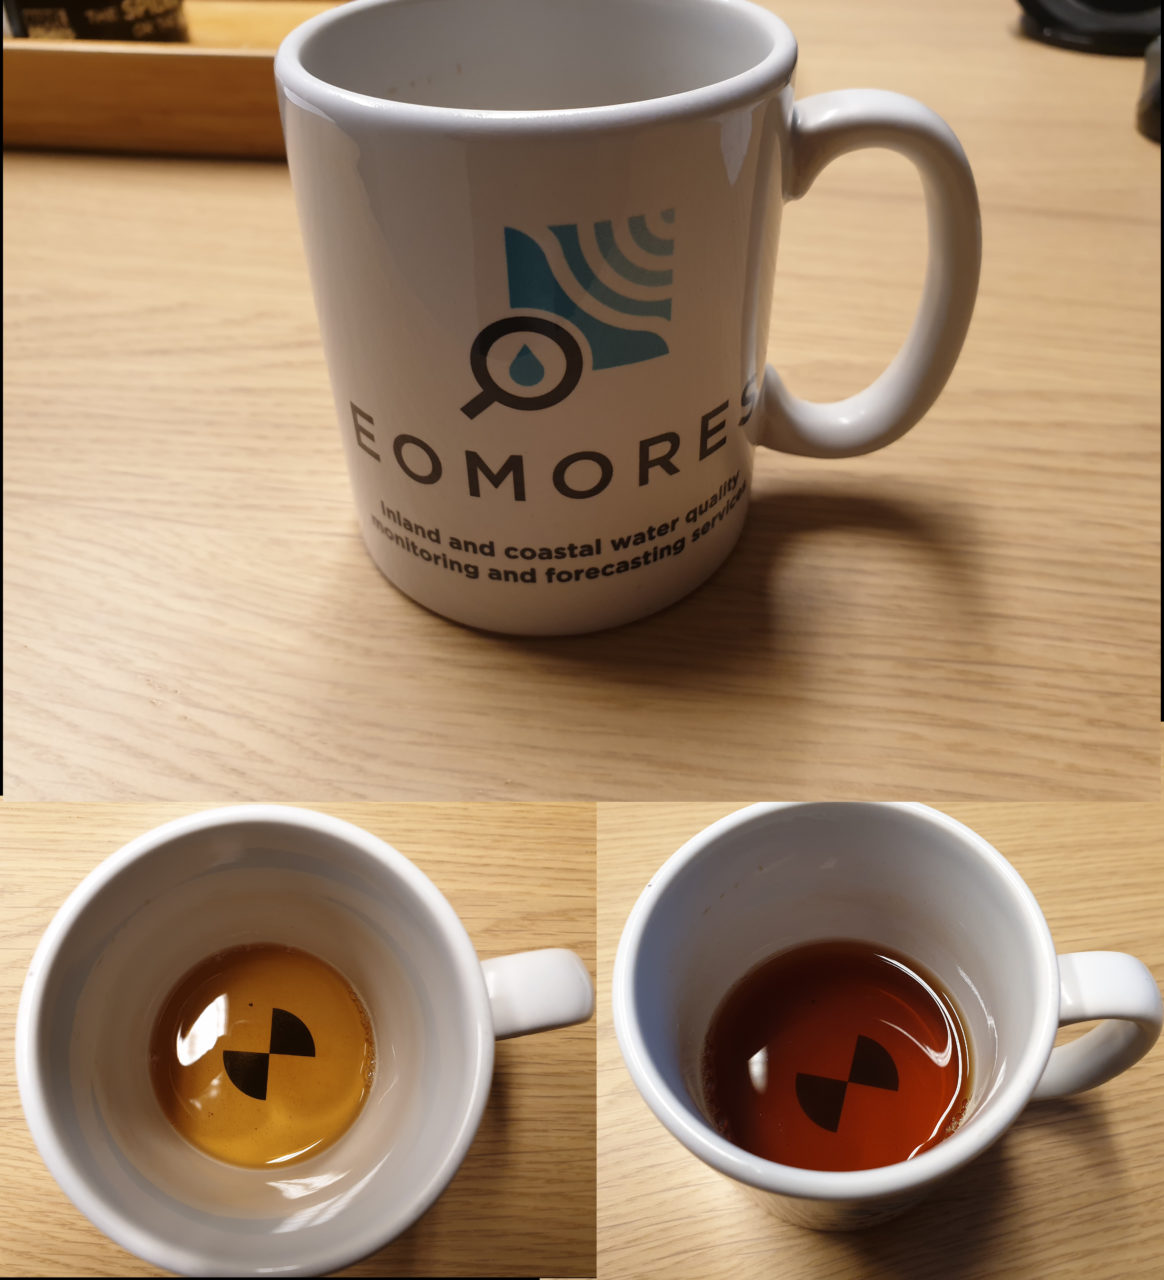 The EOMORES Secchi Mug (Photo by Evenflow)